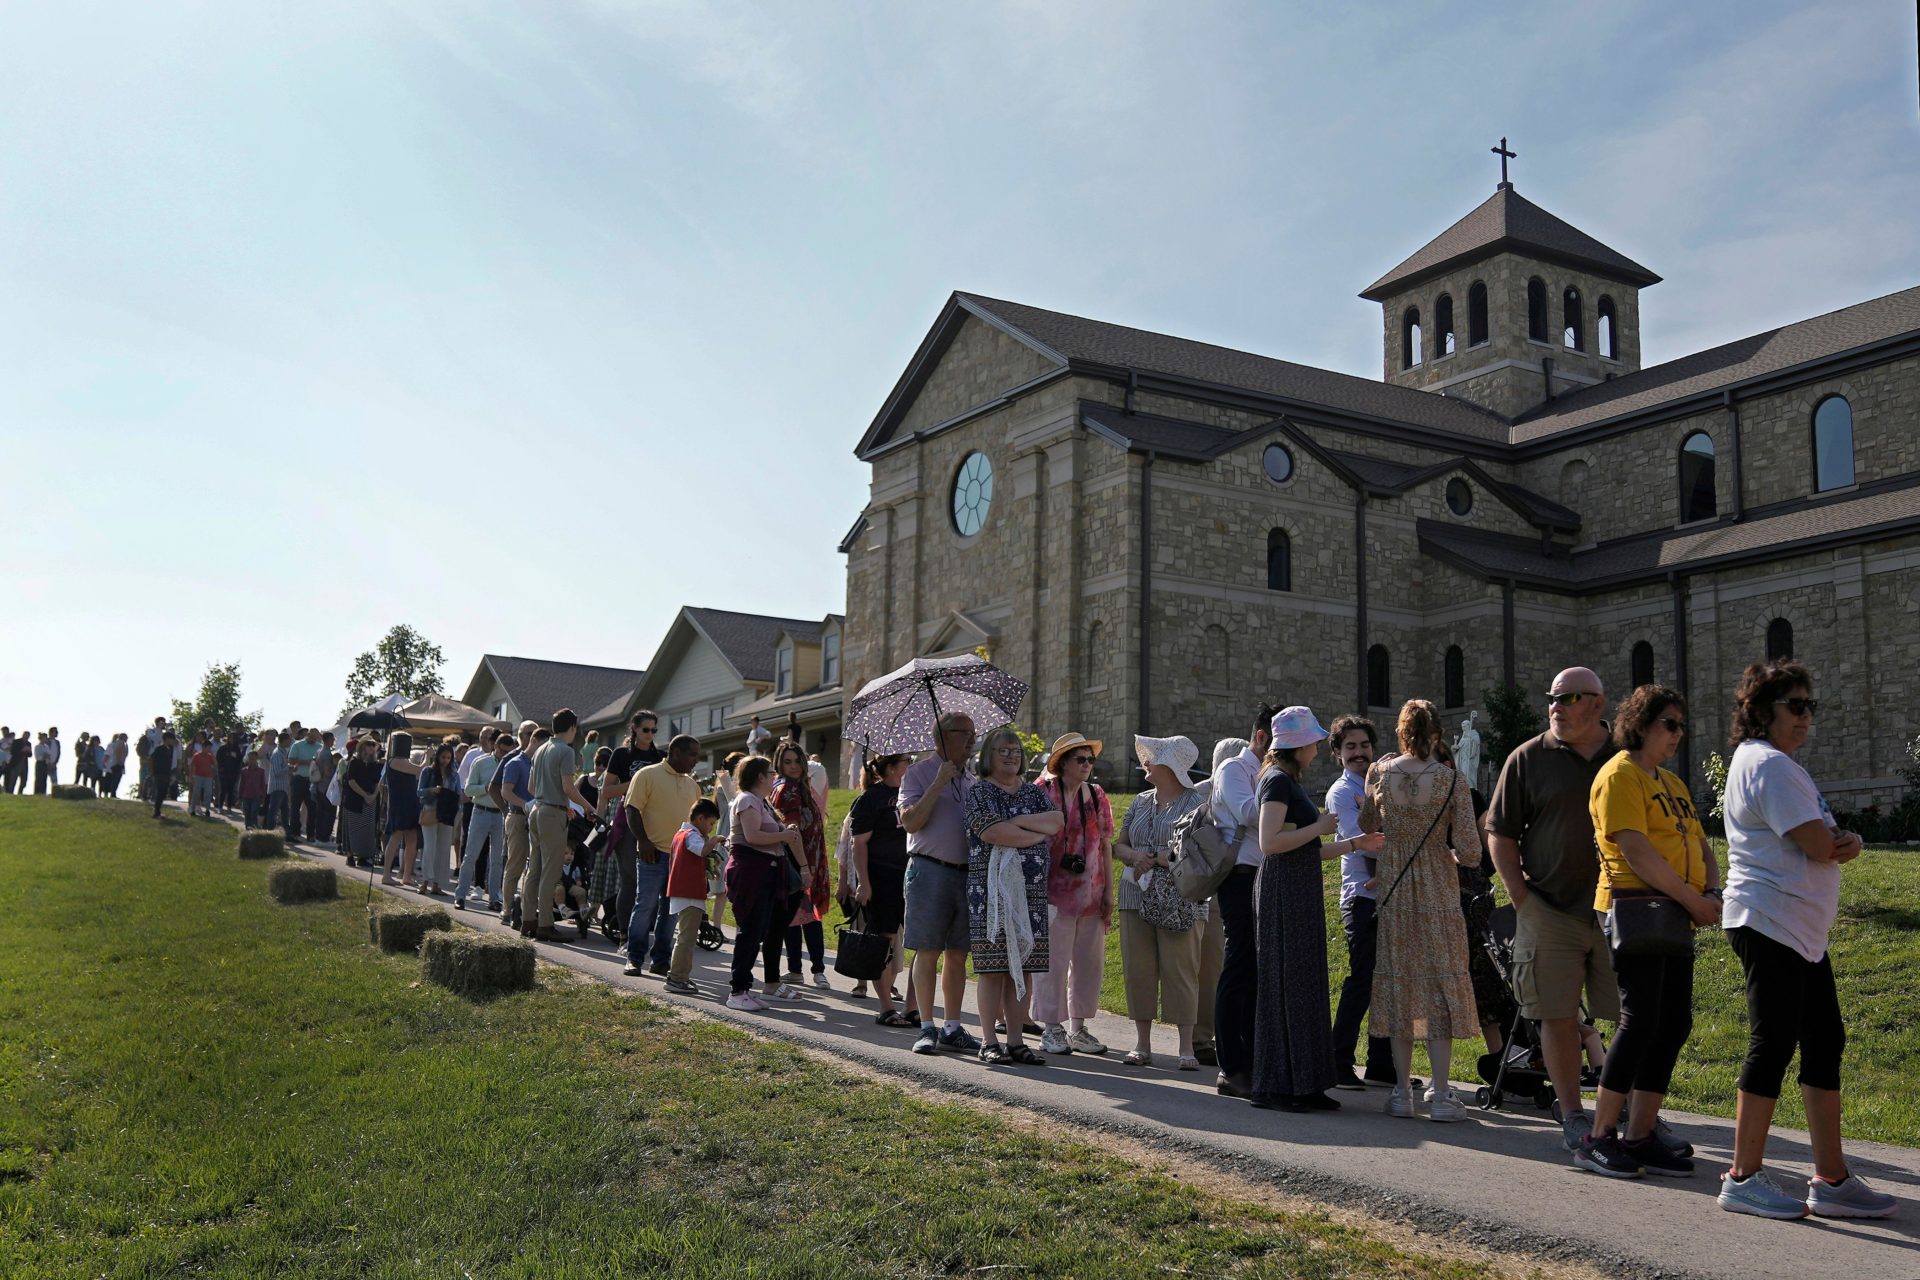 2R4NYCT People wait to view the body of Sister Wilhelmina Lancaster at the Benedictines of Mary, Queen of Apostles Abbey near Gower, Missouri